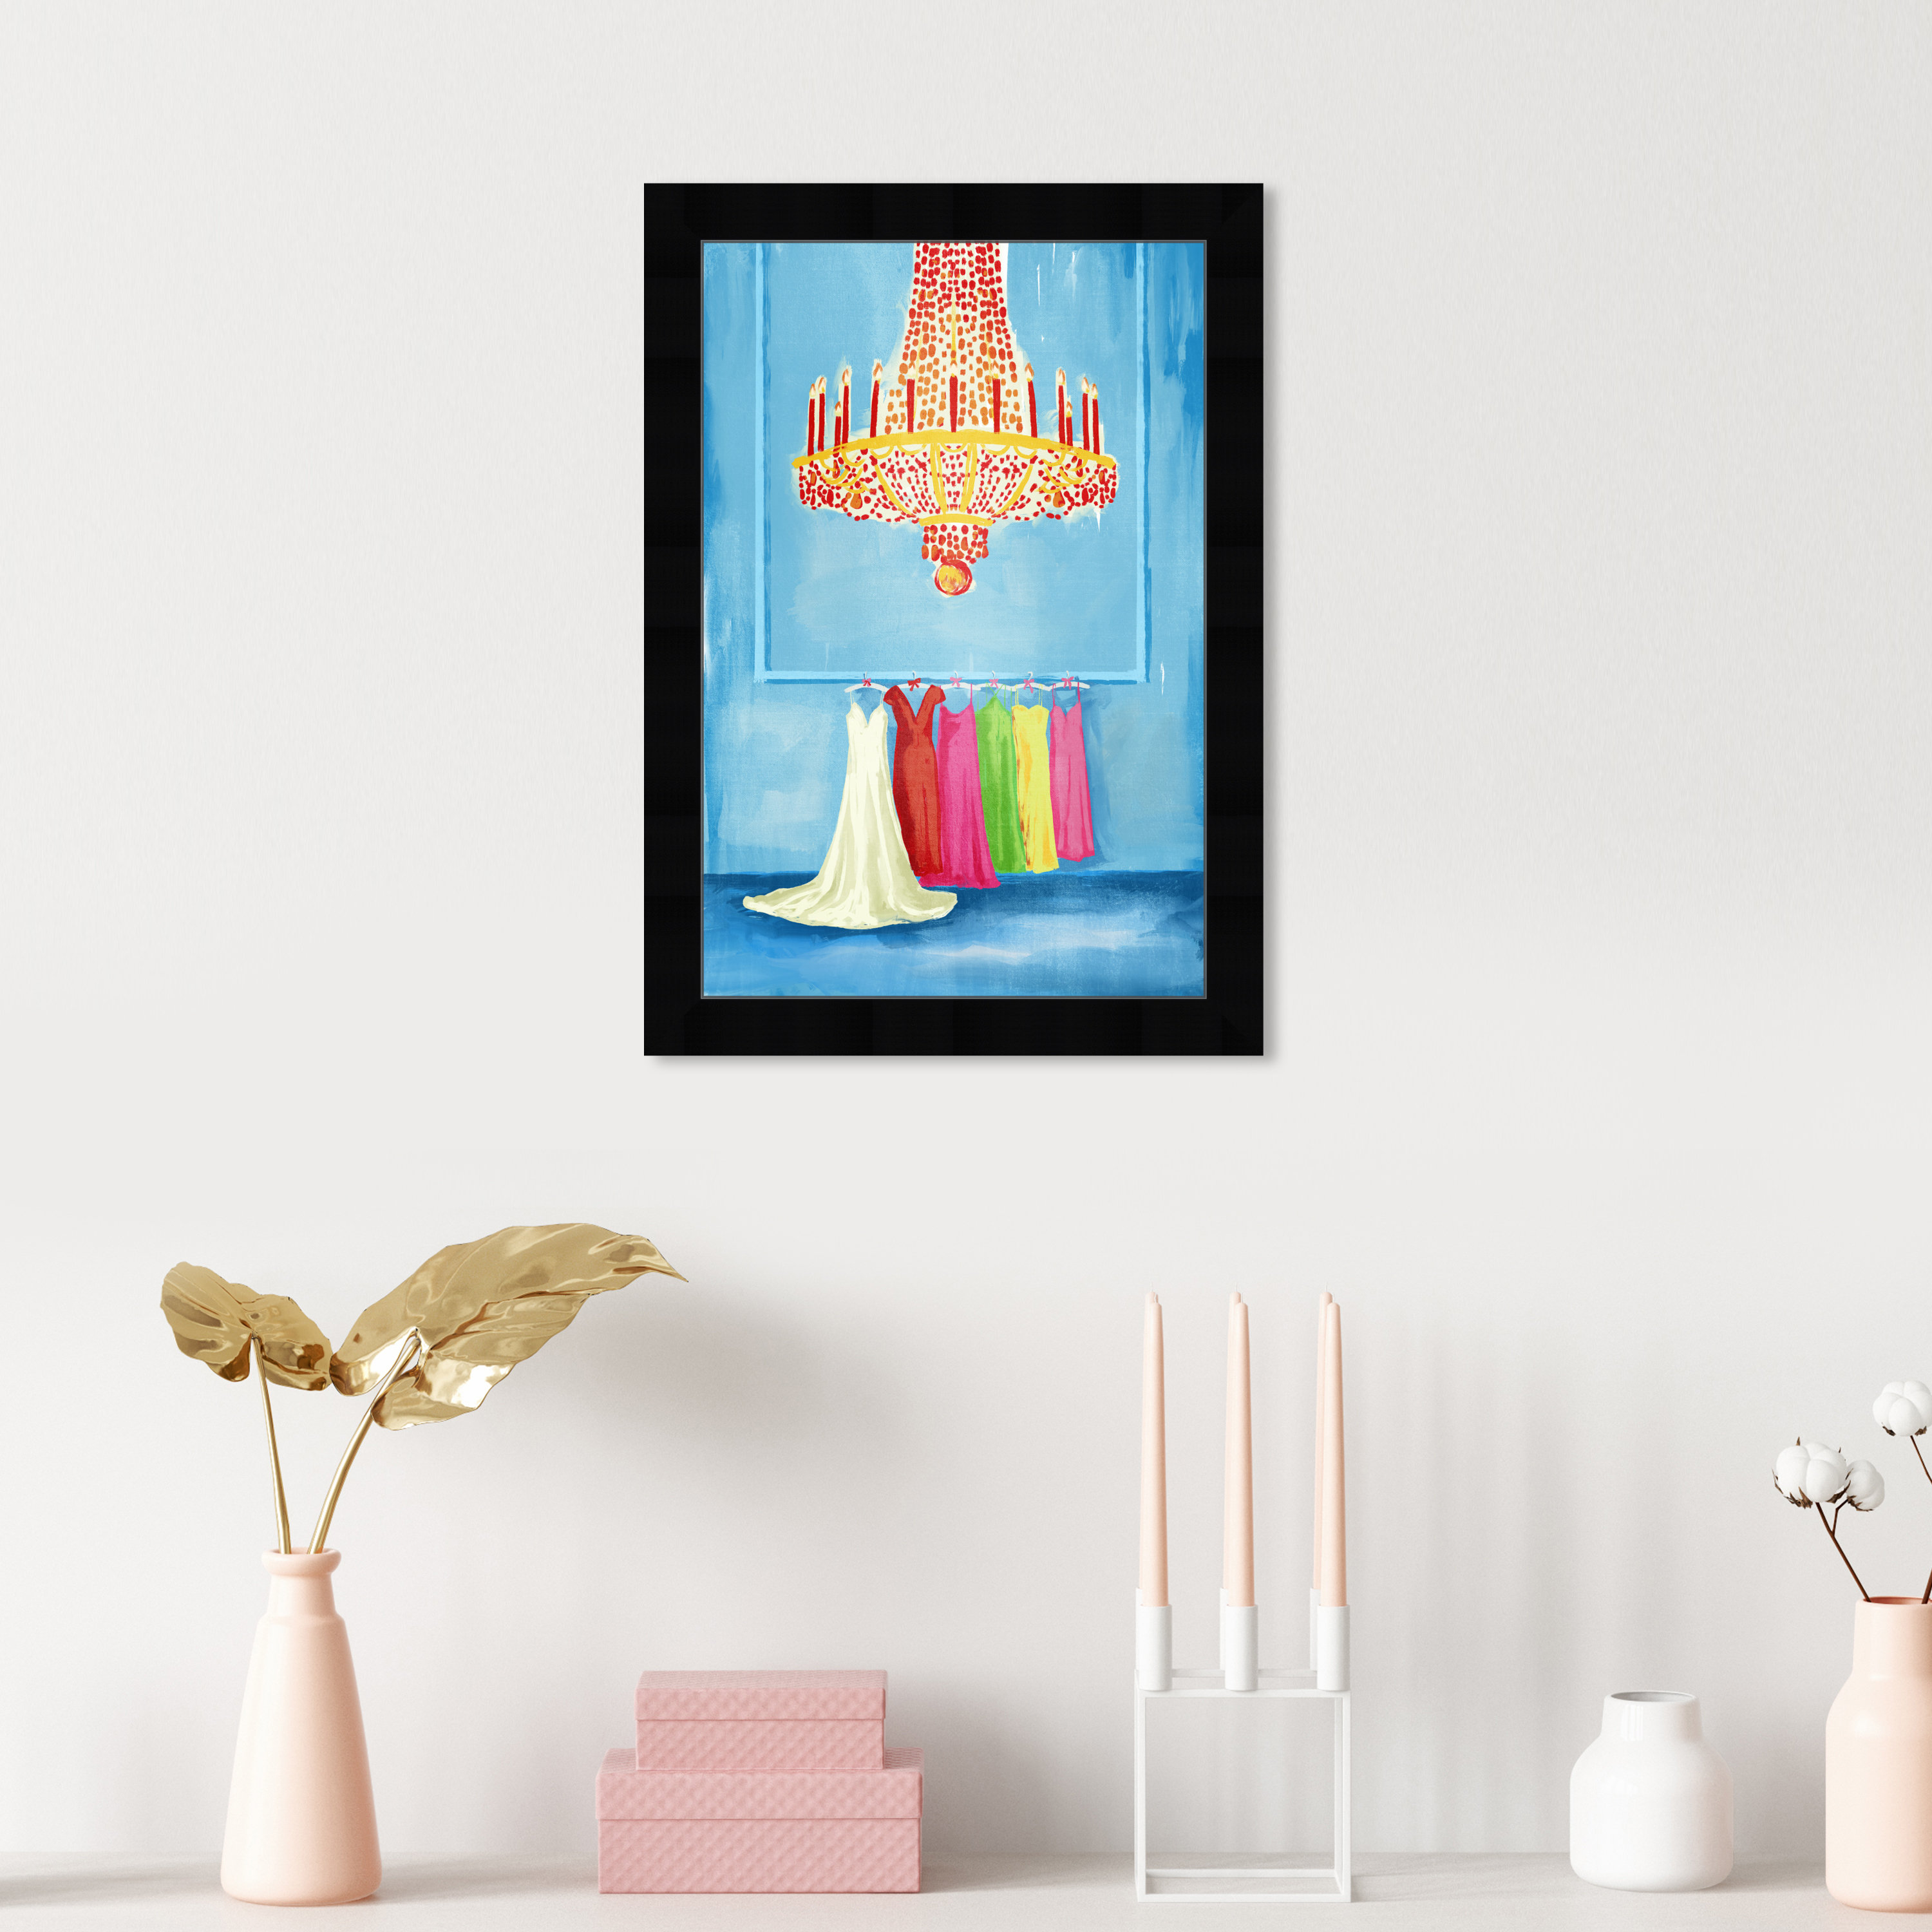 Wayfair　Chic　Oliver　Oliver　On　Gal　Collection　Colorful　Chandelier　Framed　Gal　Paper　Oliver　Gal　Art　Colorful　Dress　by　Graphic